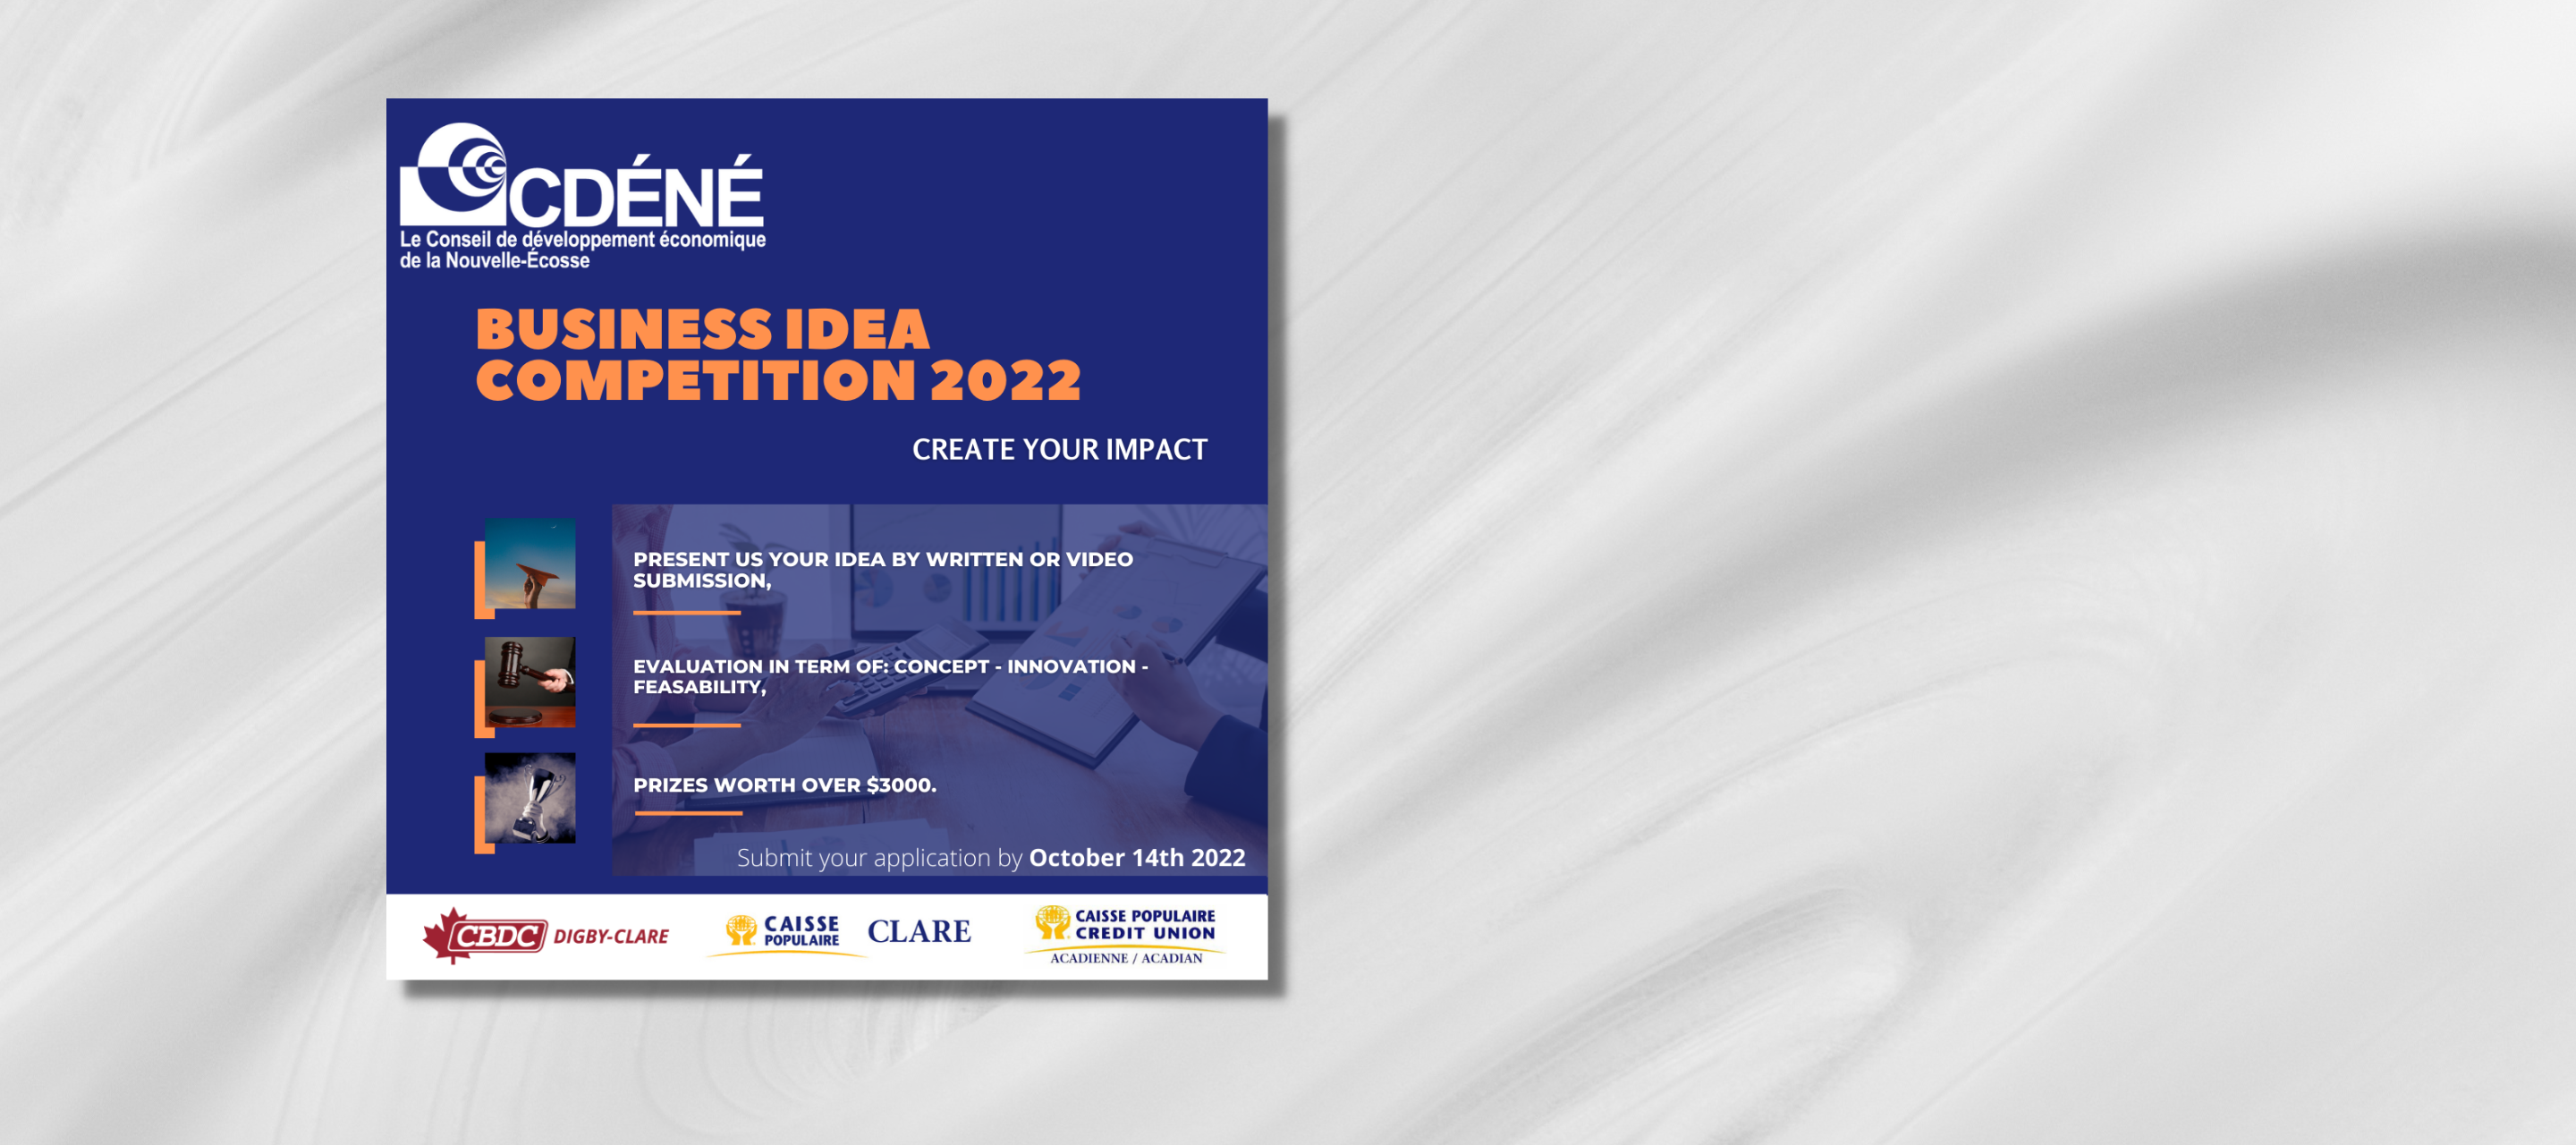 BUSINESS IDEA COMPETITION – 2022 Image 1